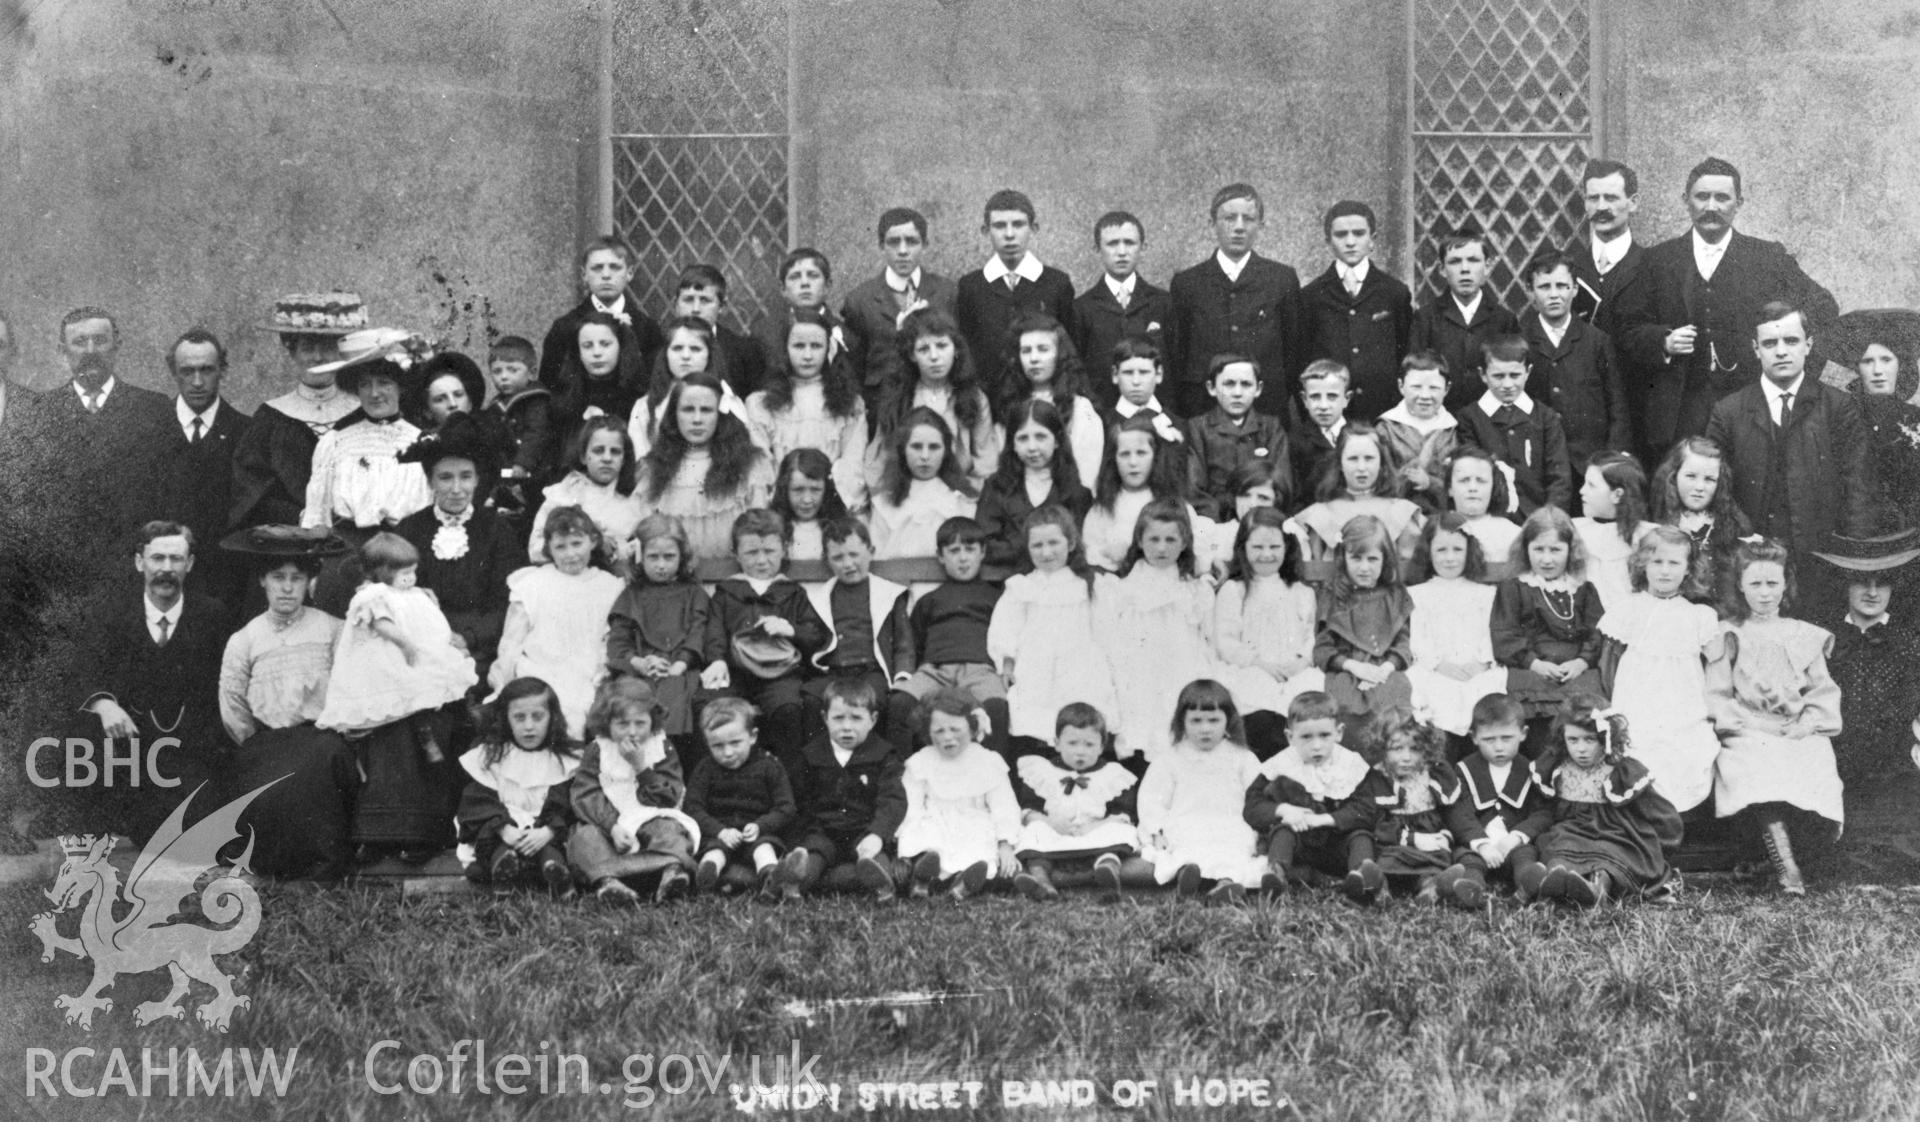 Copy of b/w postcard of a group photograph of the Union Street Band of Hope temperance movement, Carmarthen. Copied from original loaned by Thomas Lloyd.  Copy negative held.